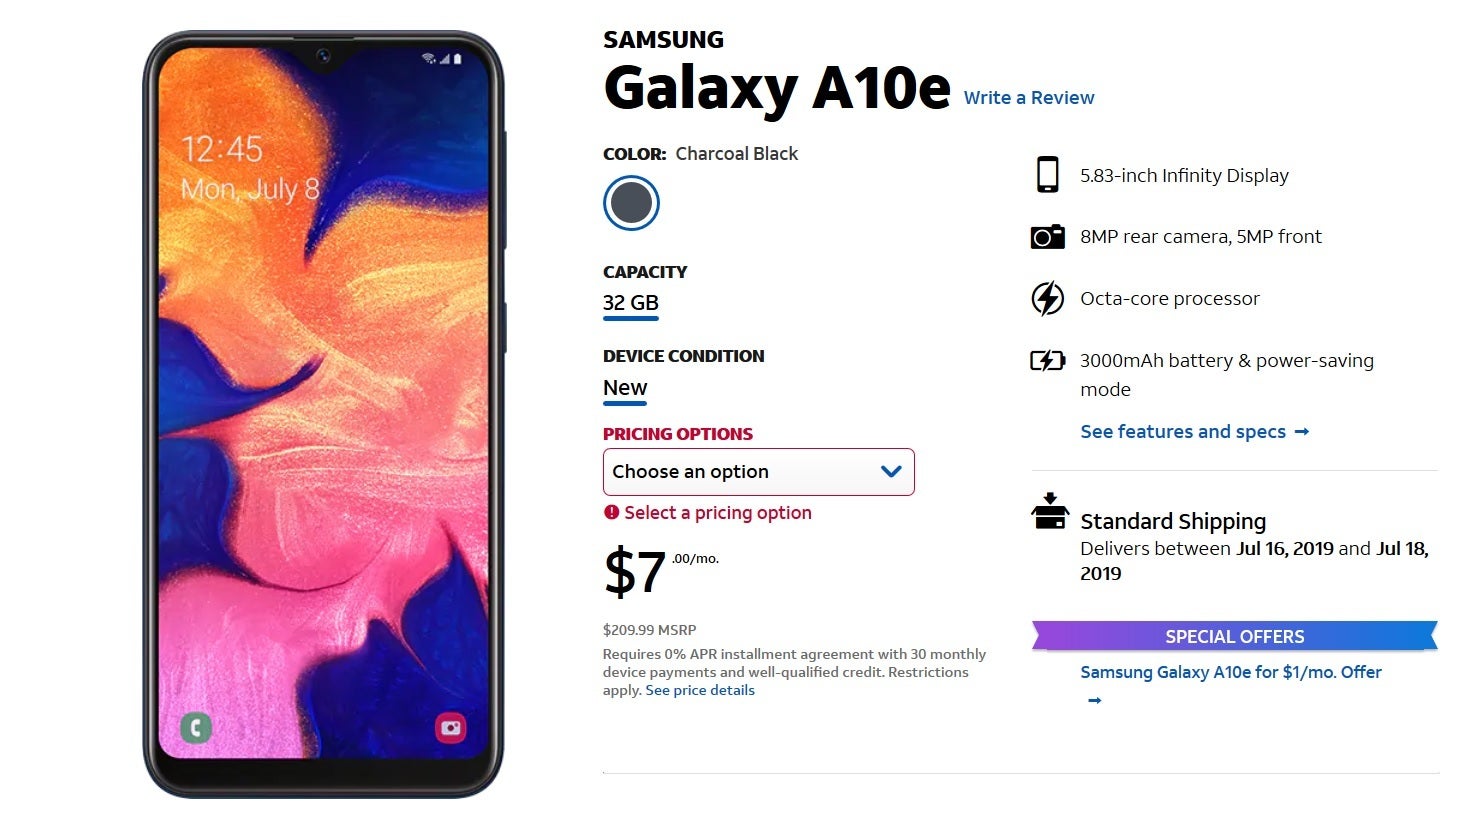 AT&amp;amp;T is now selling the Samsung Galaxy A10e - Samsung Galaxy A10e now available at AT&amp;T; phone is $1 per month with the addition of a new line